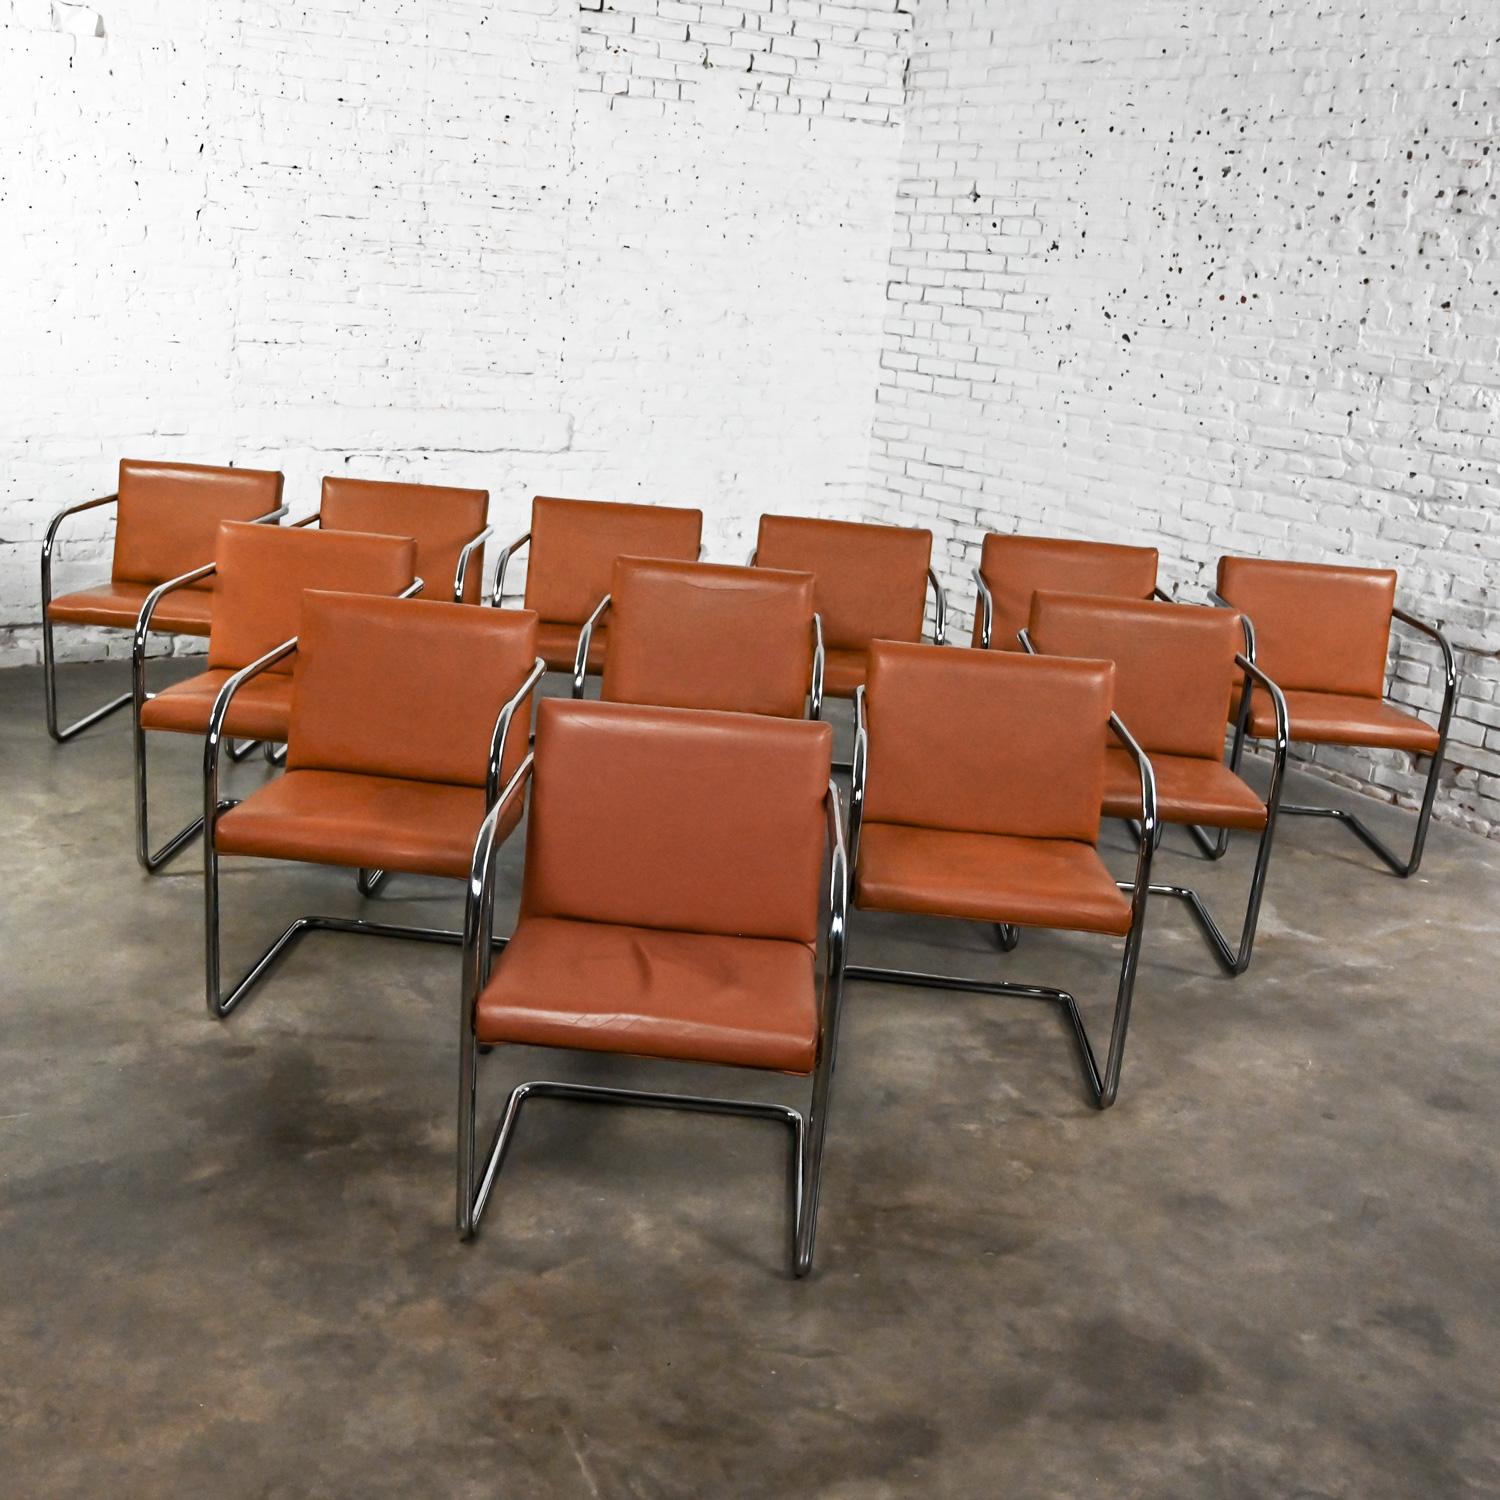 Thonet Bauhaus Brno Style Chairs Chrome & Cognac Leather Cantilever Set of 12  For Sale 7